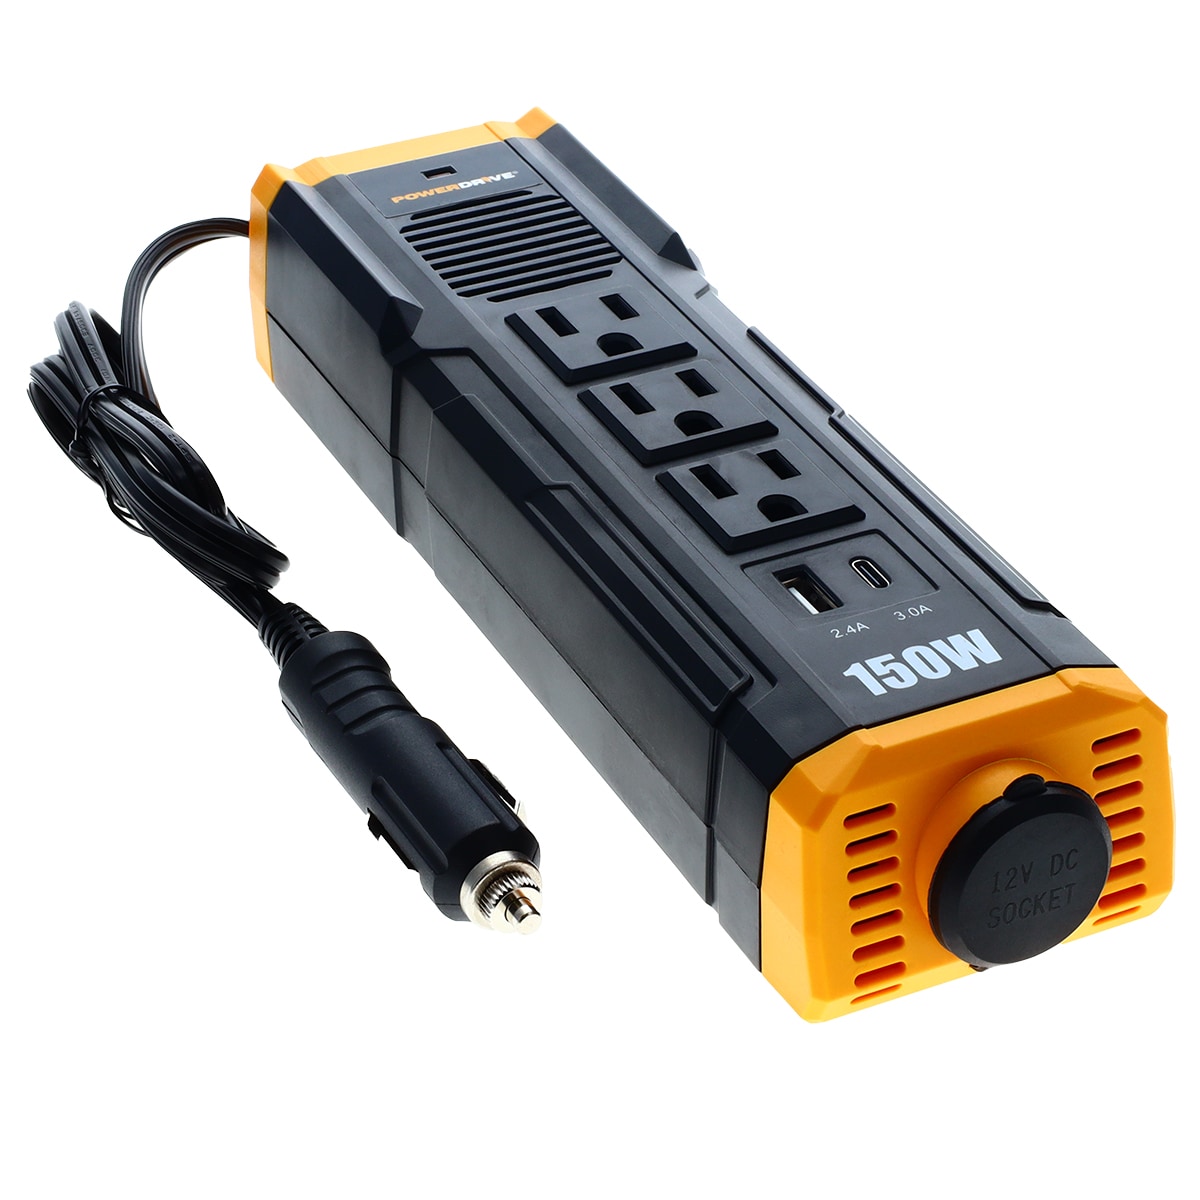 PowerDrive Power Inverter with 150W Continuous Output - 5 Outlets